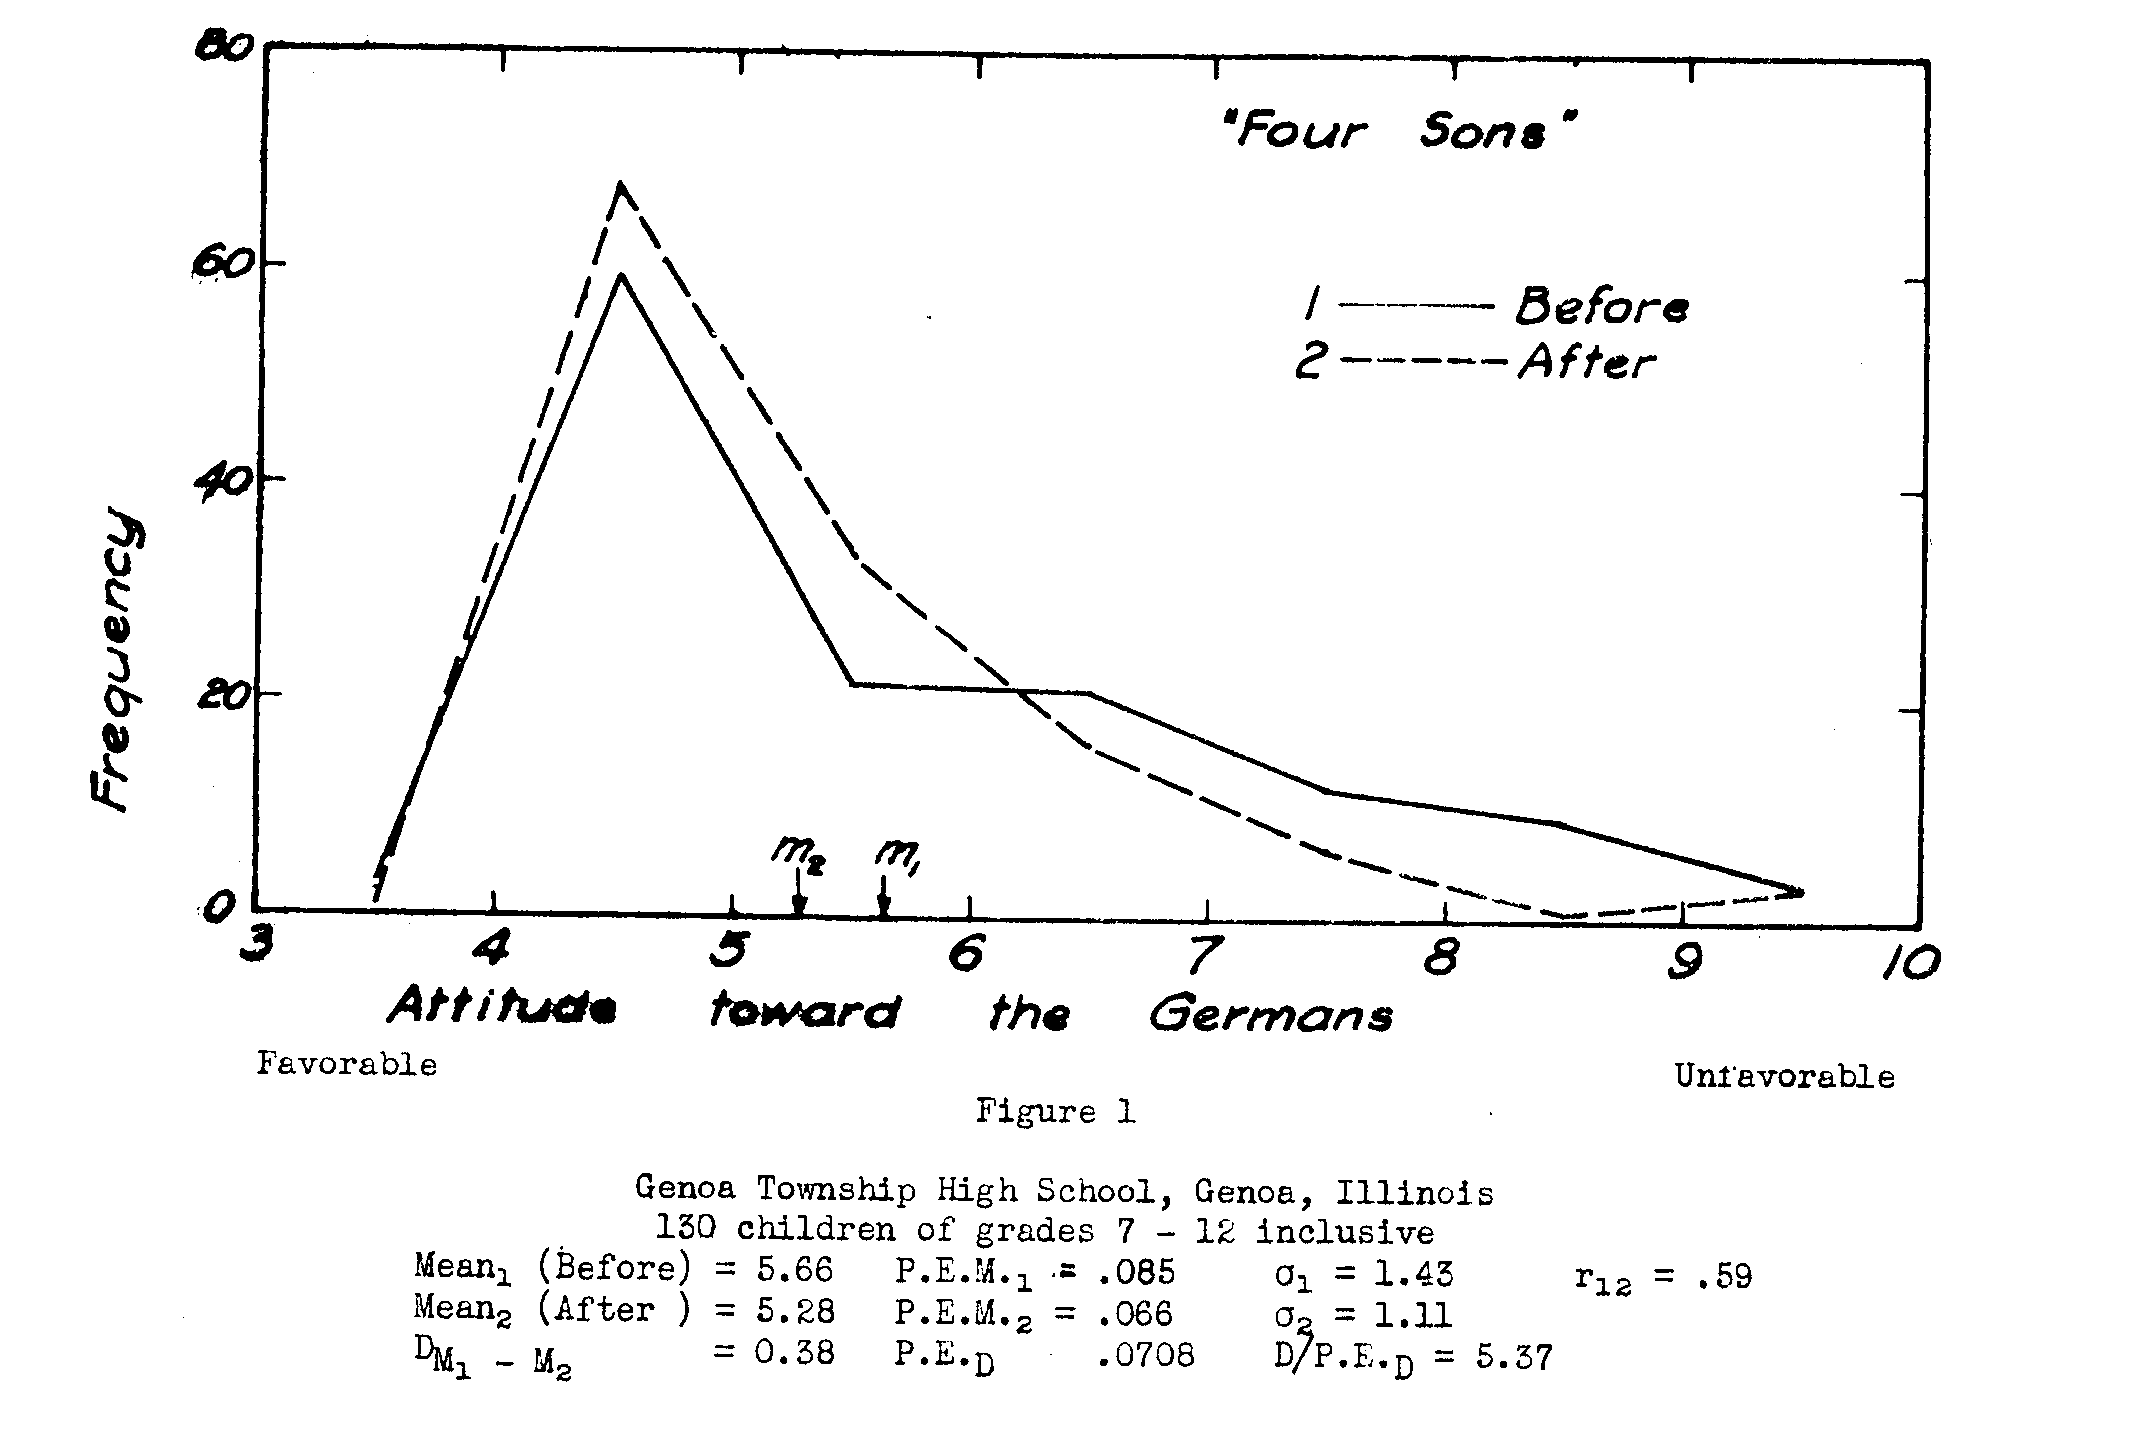 Figure 1, Attitude toward Germans, before and after FOUR SONS